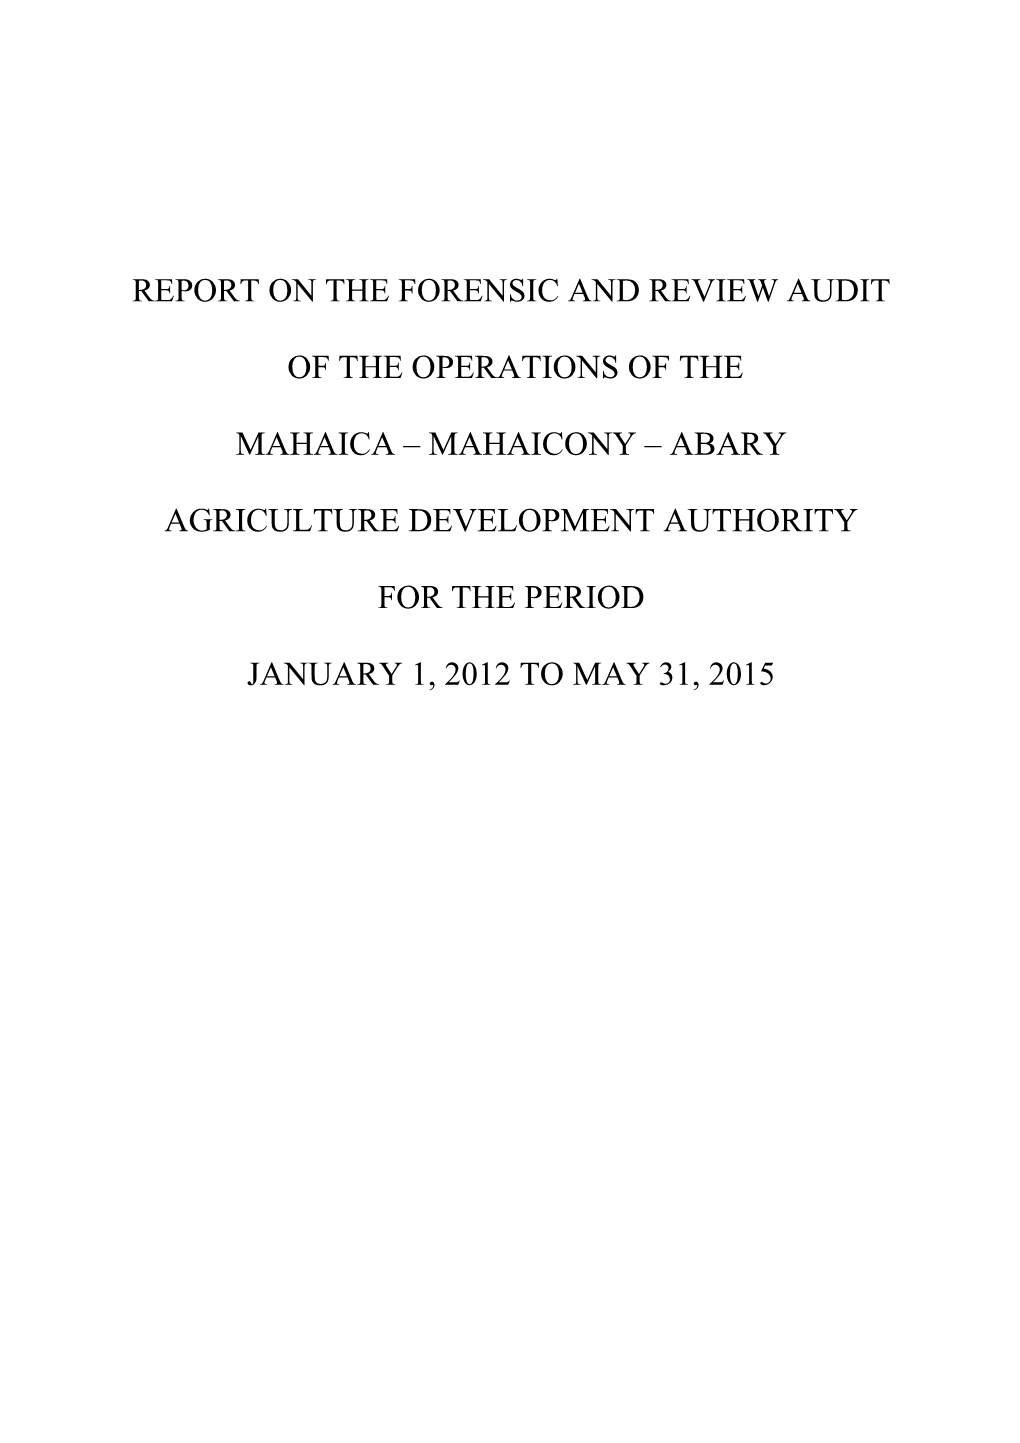 Report on the Forensic and Review Audit of the Operations of the Mahaica – Mahaicony – Abary Agriculture Development Author